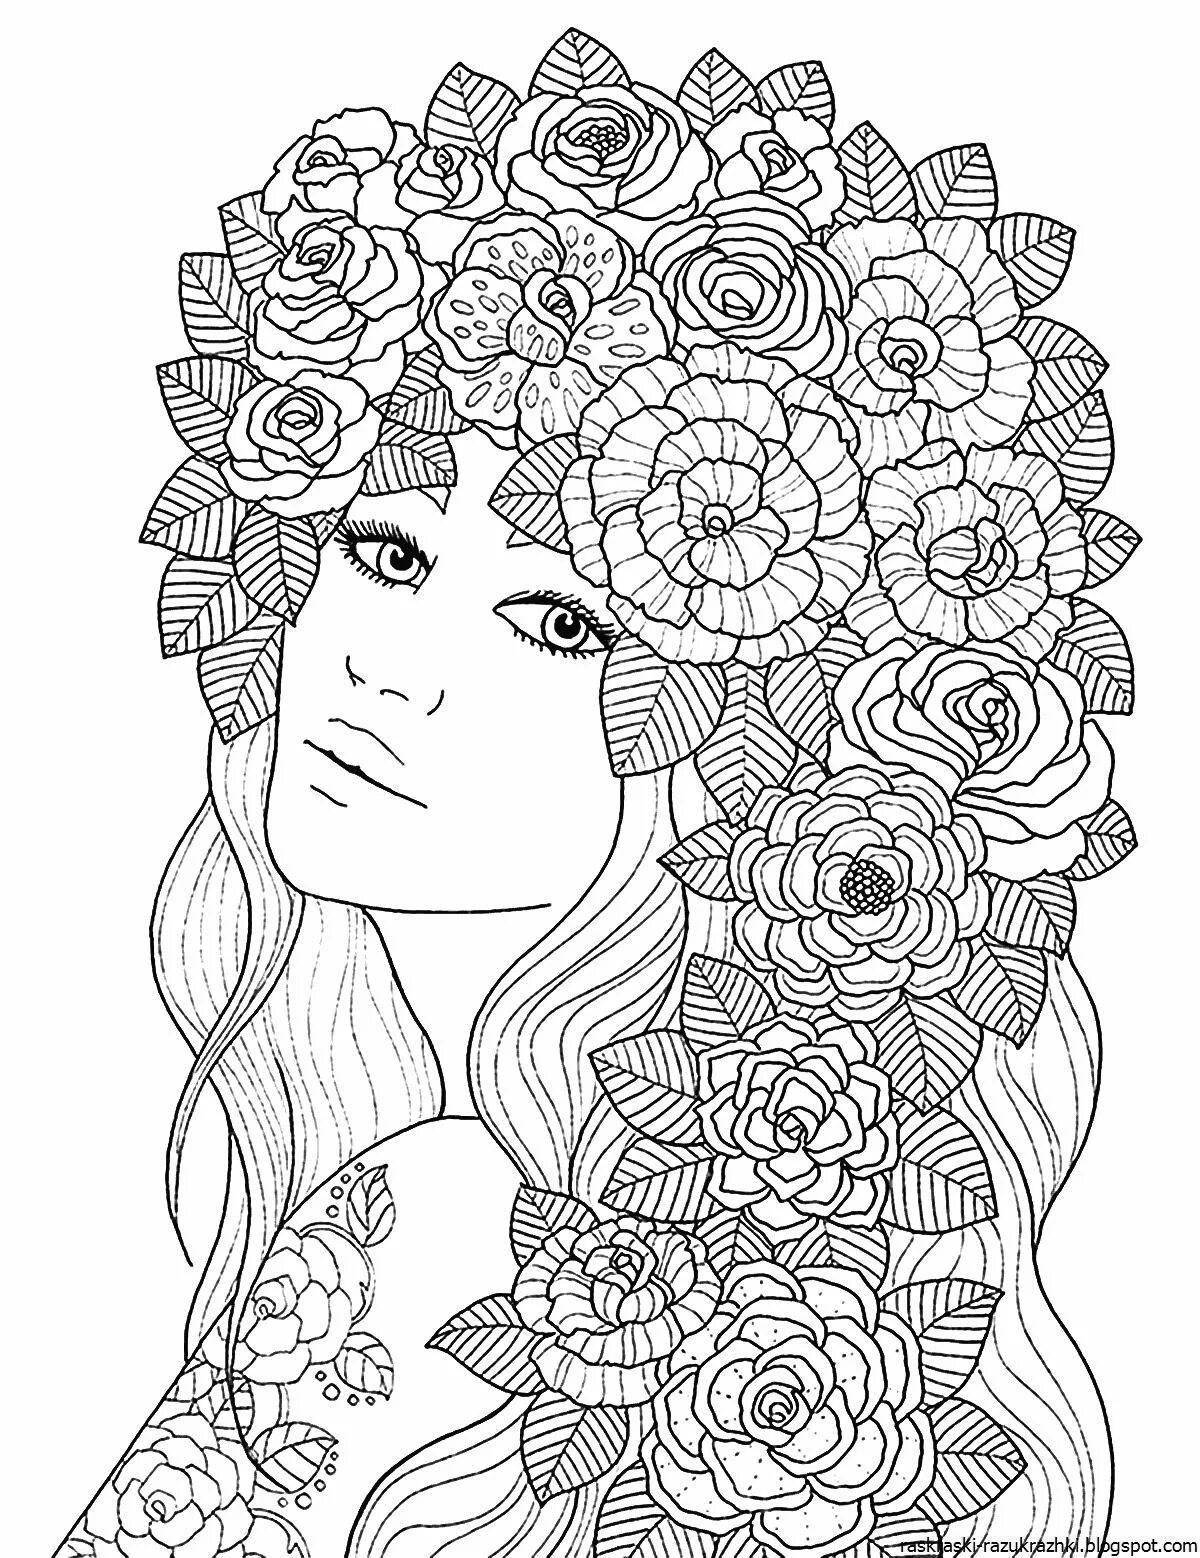 Fascinating anti-stress coloring book for girls 9-10 years old